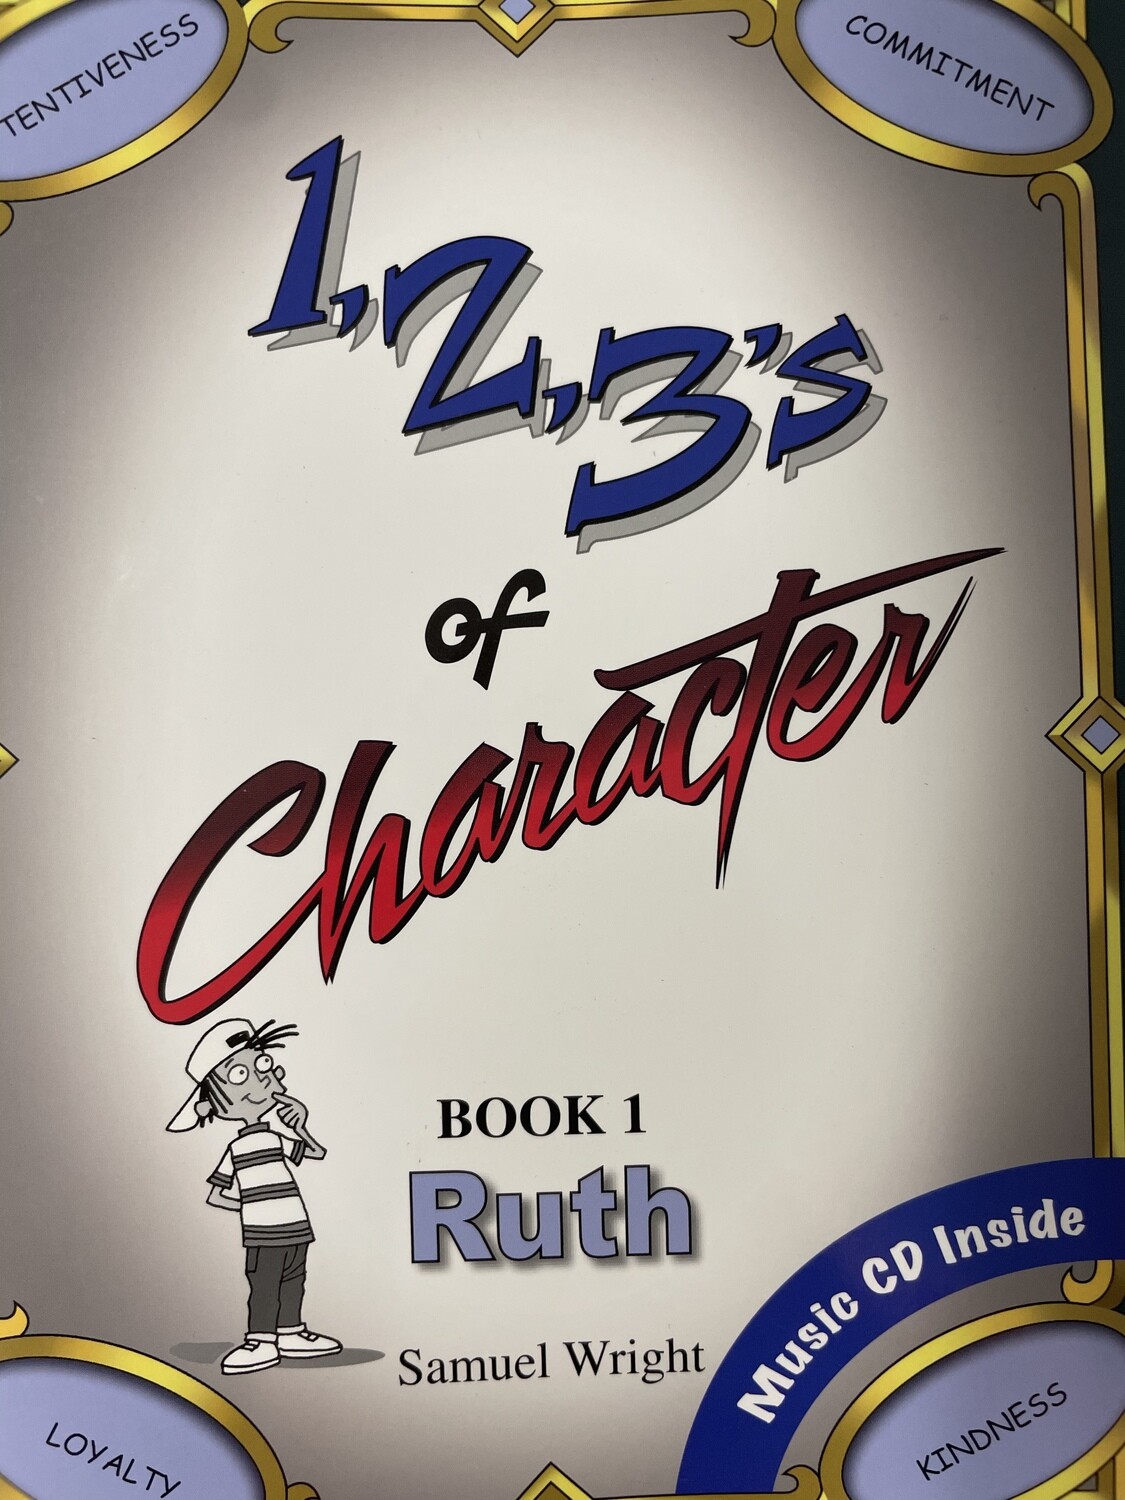 1, 2, 3’s of Character — Ruth